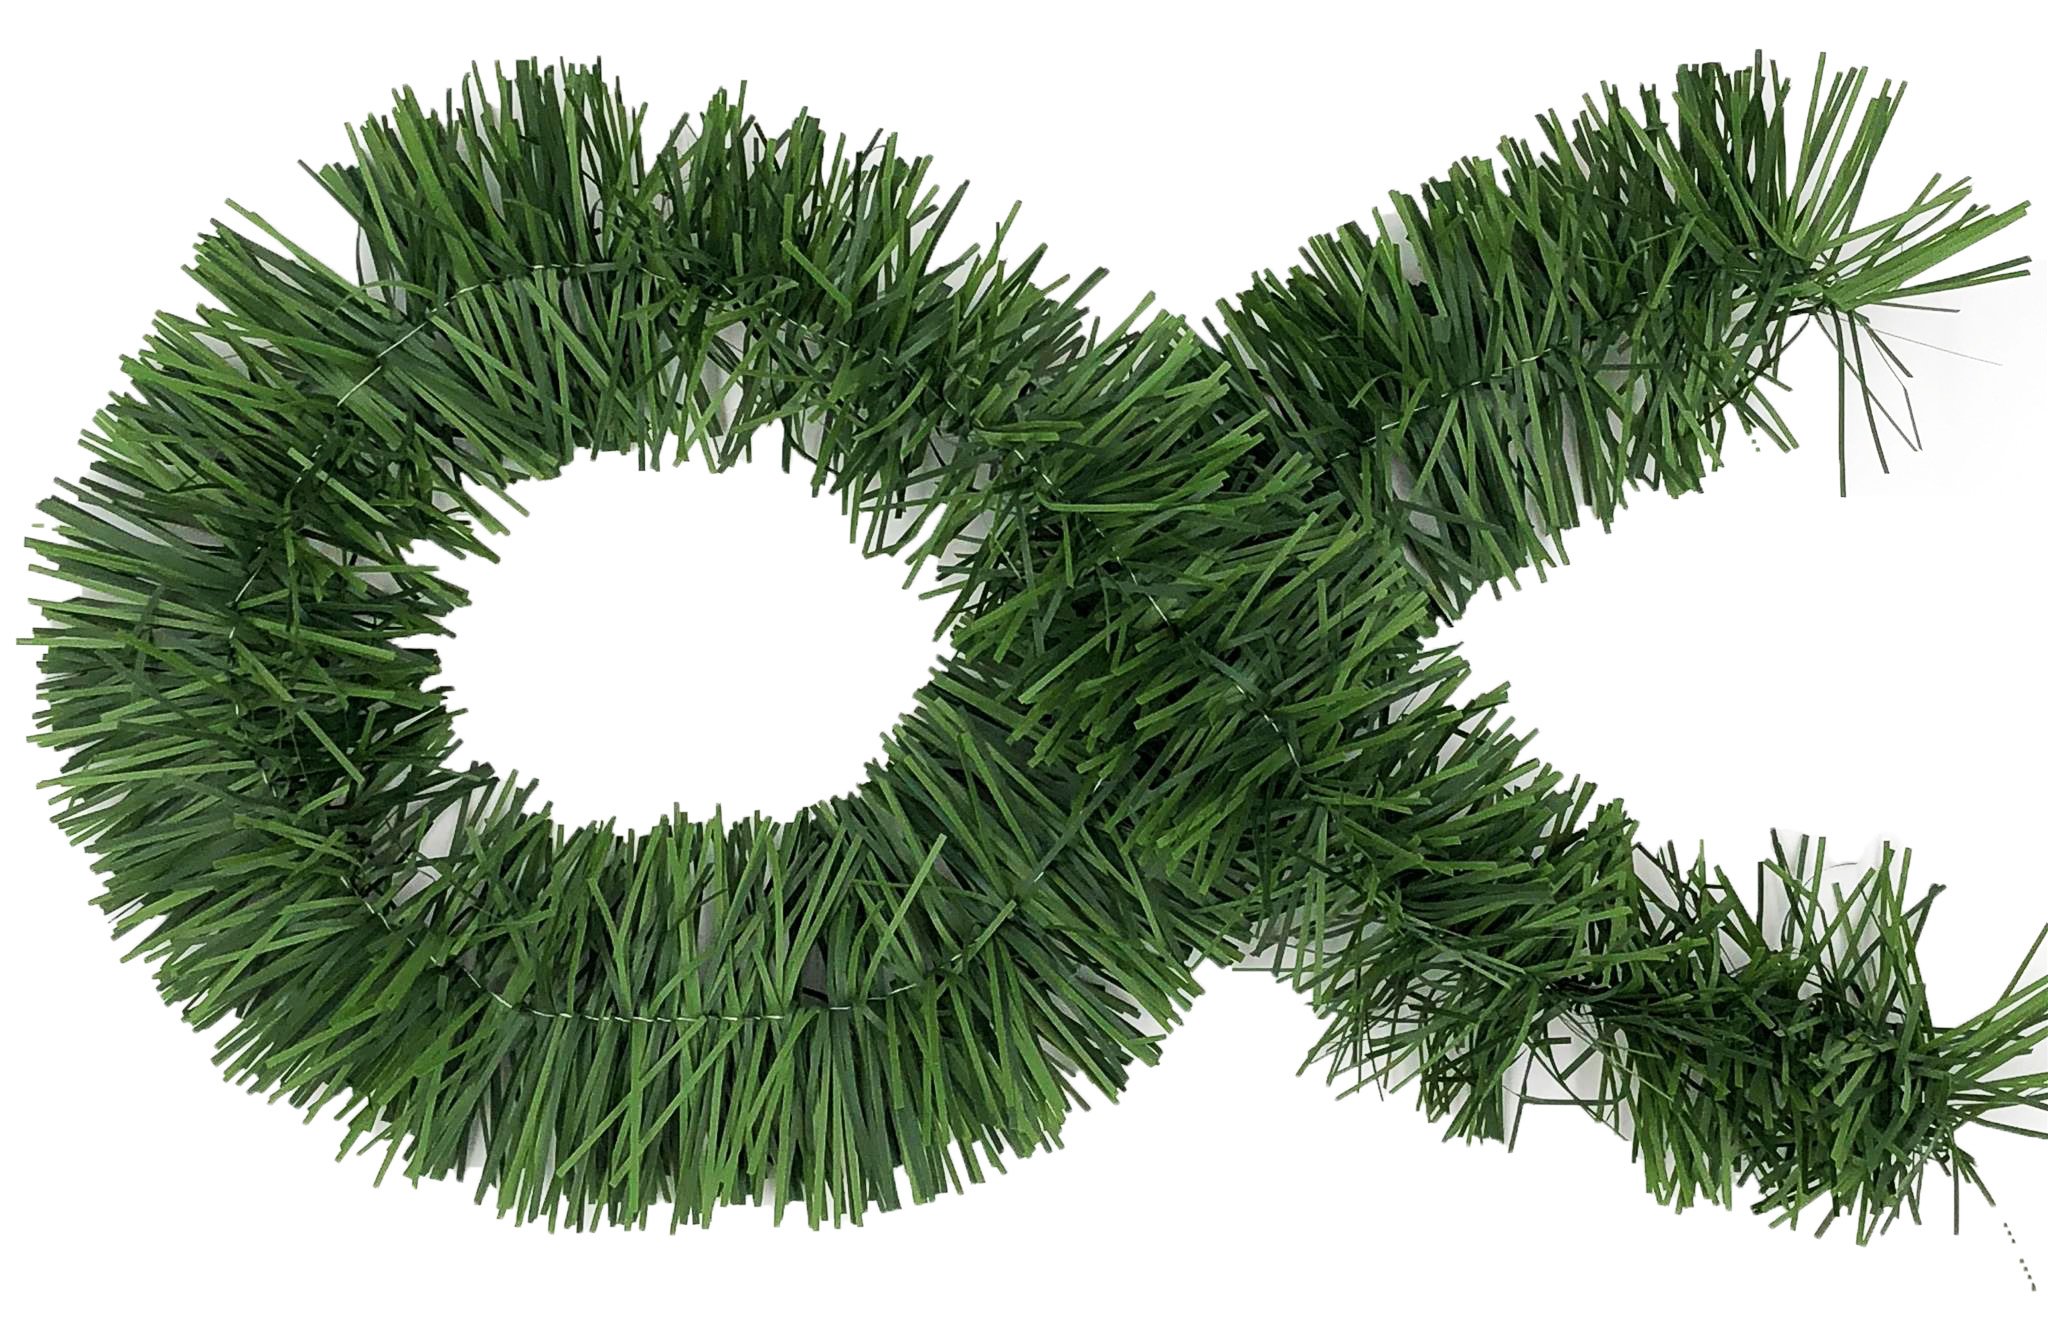 50 Foot Garland | Christmas Garland for Christmas Decorations Indoor or Outdoor | Non-Lit Soft Garland Christmas Decorations | Green Holiday Decor | Home Garden Artificial Greenery (1, 50 FT)